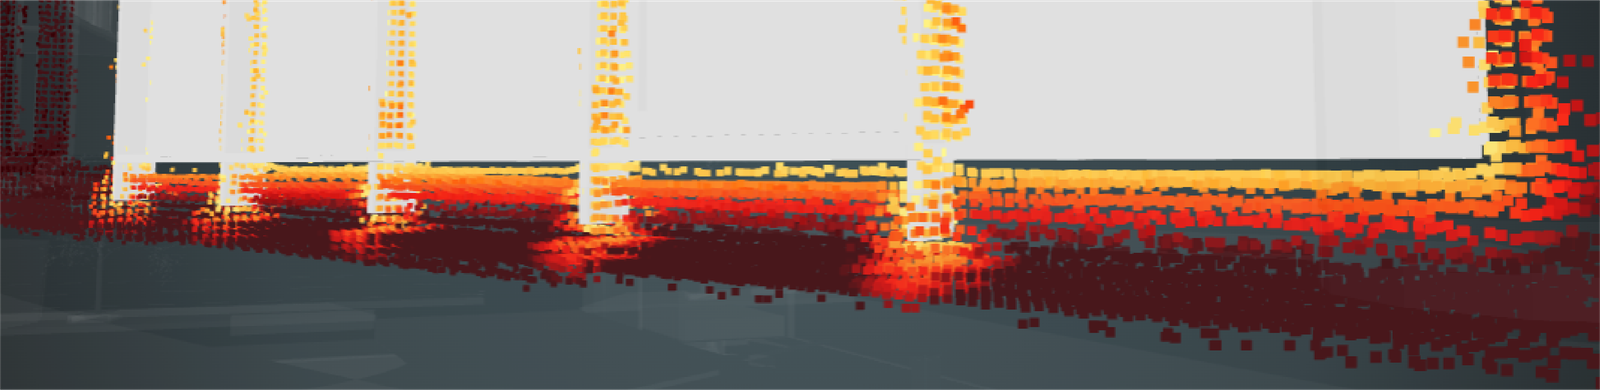 point clud heat map of ditsnce